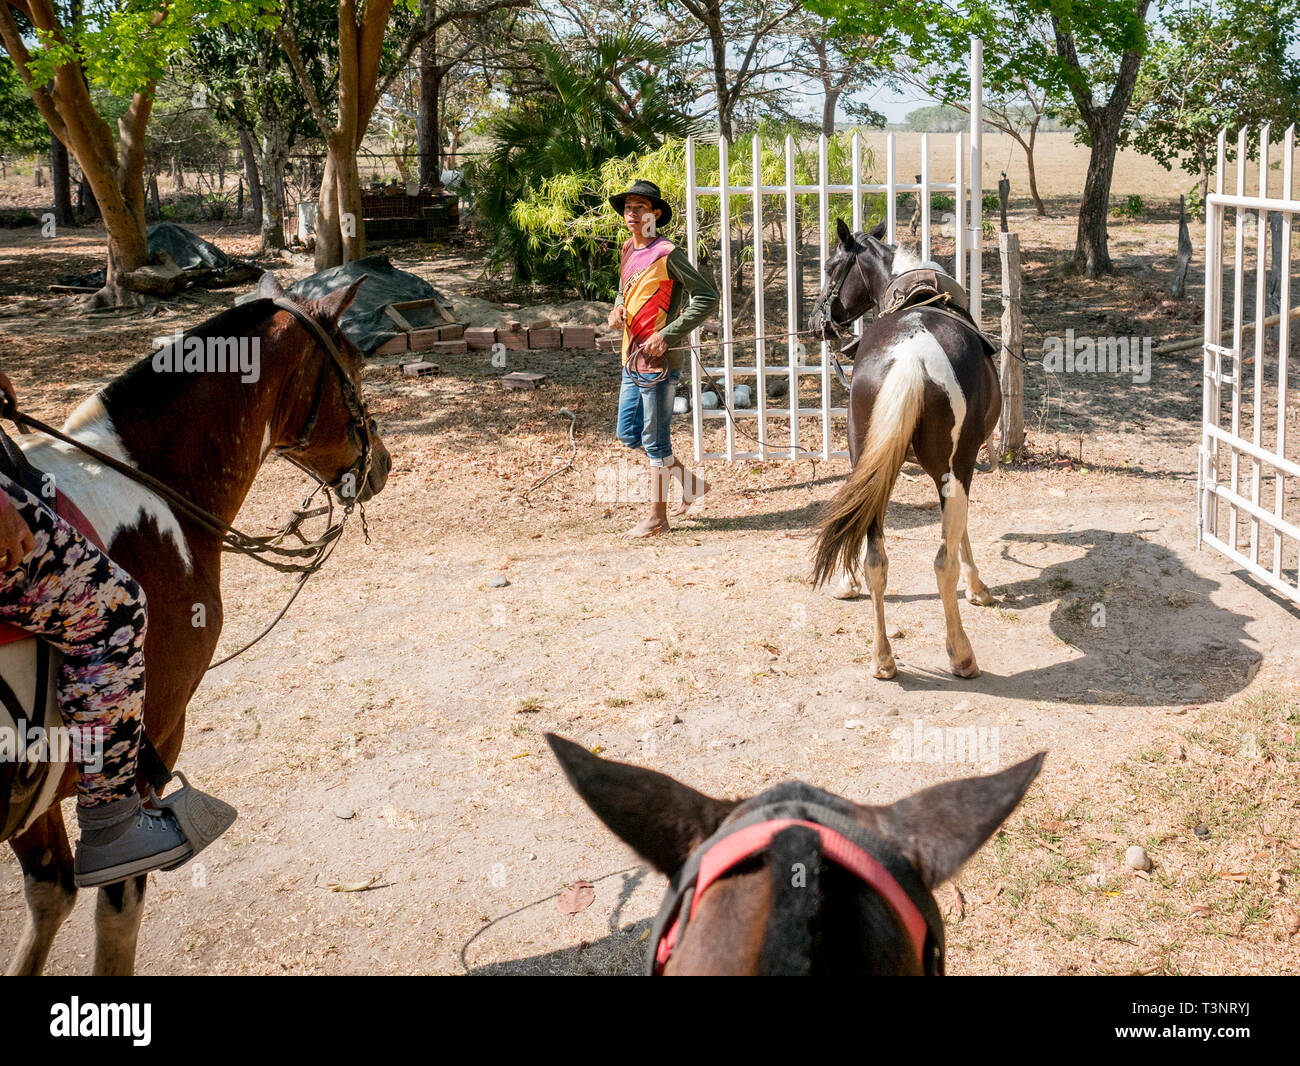 February 9, 2019 - Finca El ParaÃ-So/Yopal, Casanare, Colombia - A cow boy seen working with horses.Colombian cowboys taking care of the cows in the region of Casanare, eastern Colombia, between the Ands, the Orinoco River and the border with Venezuela. These are Plains and pastures with wide rivers and marshes, a region of big biodiversity. But nowadays, it is in danger because of climate change. Credit: Jana Cavojska/SOPA Images/ZUMA Wire/Alamy Live News Stock Photo